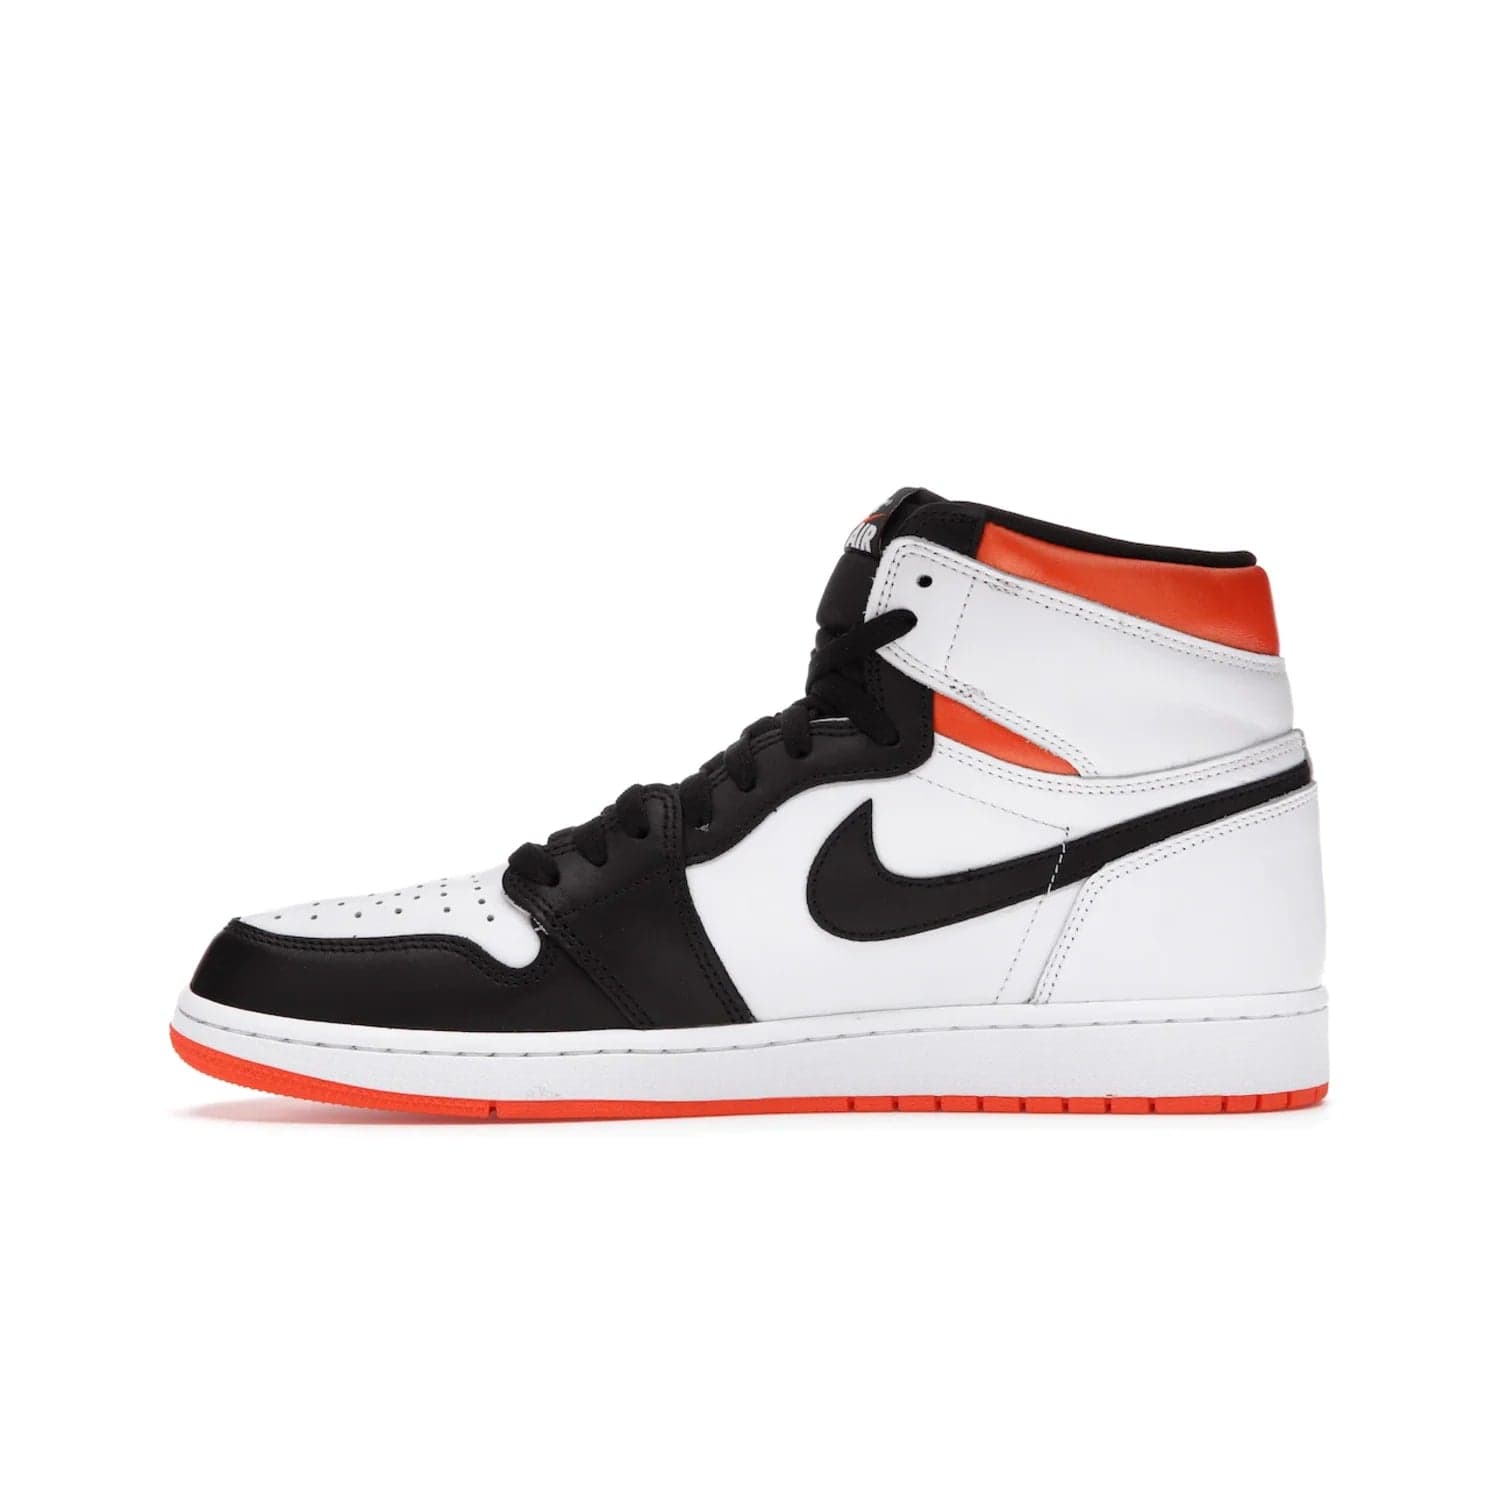 Jordan 1 Retro High Electro Orange - Image 19 - Only at www.BallersClubKickz.com - This Air Jordan 1 Retro High Electro Orange features a white leather upper with black overlays and vibrant Hyper Orange ankle wrap. Turn heads with this iconic design of woven tongue label and sole. Get yours today and add some serious style to your rotation.